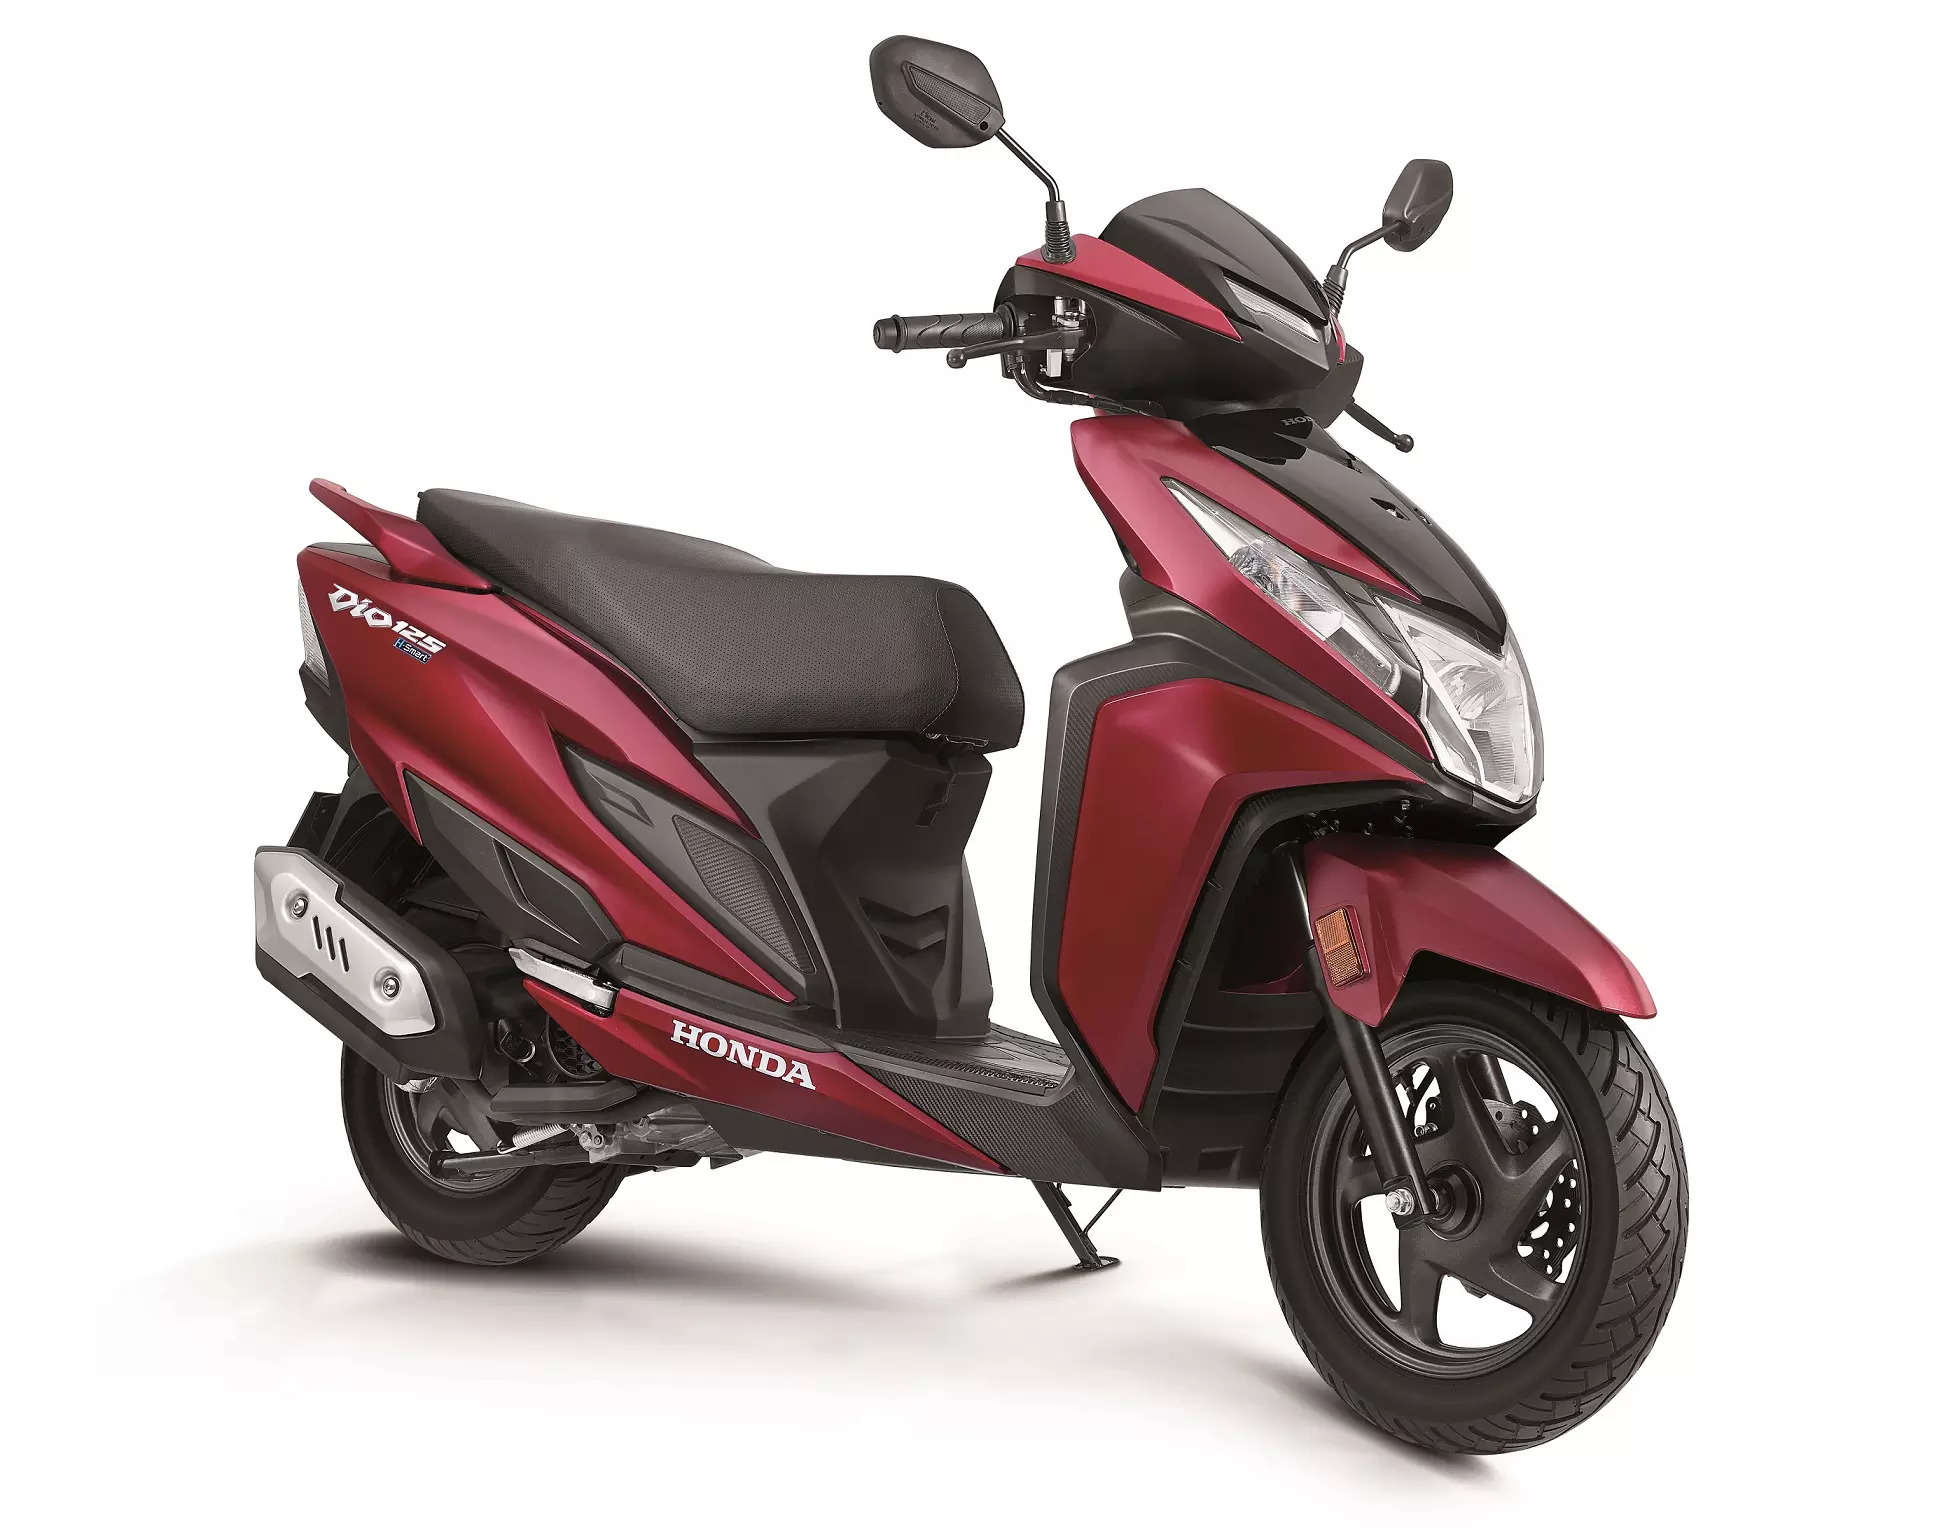 Honda New Launch: Honda Motorcycle & Scooter India launches Dio